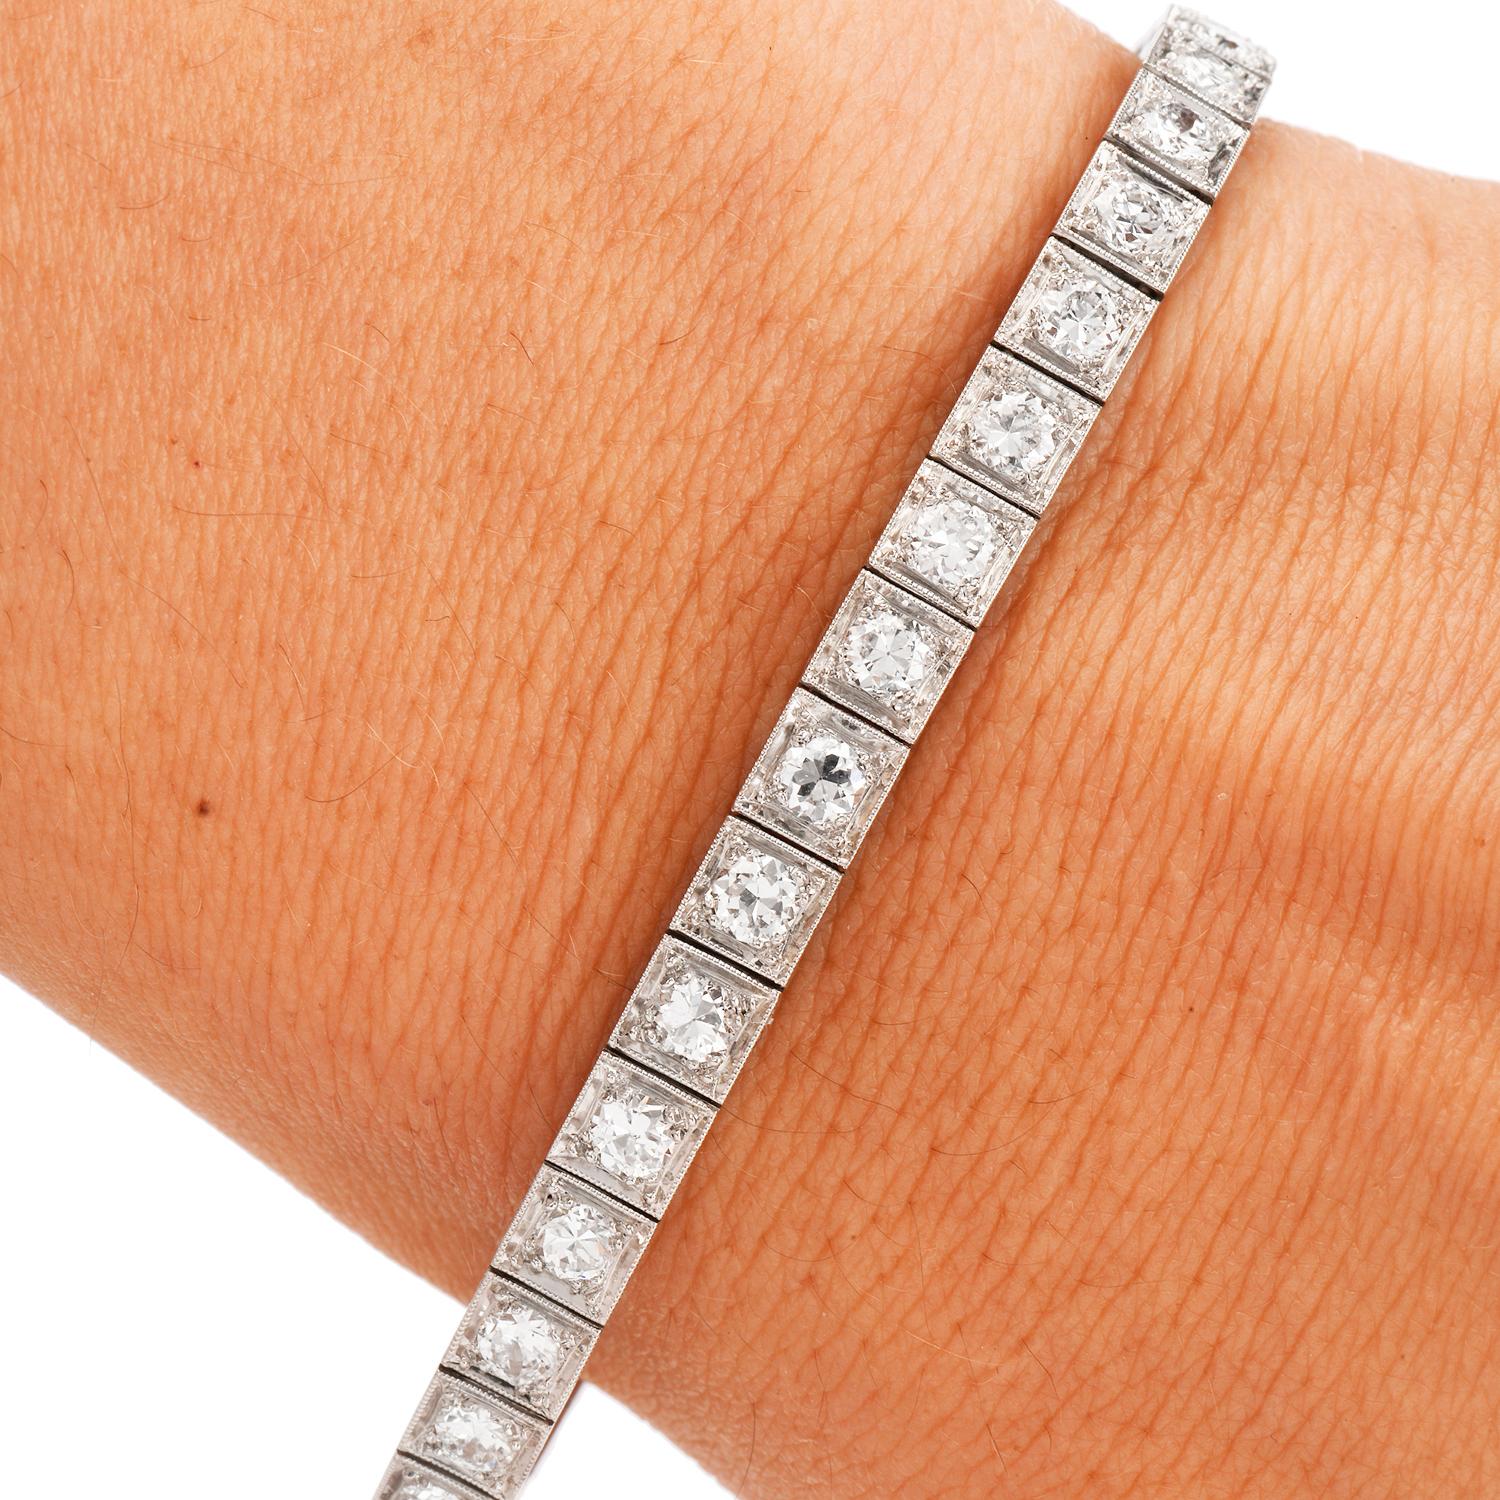 This classic diamond tennis bracelet is crafted in solid platinum, weighing 21 grams and measuring 6 ½ inches around the wrist x 5mm wide. Showcasing 36 old-European cut diamonds, prong-set into square frames, collectively weighing approximately,